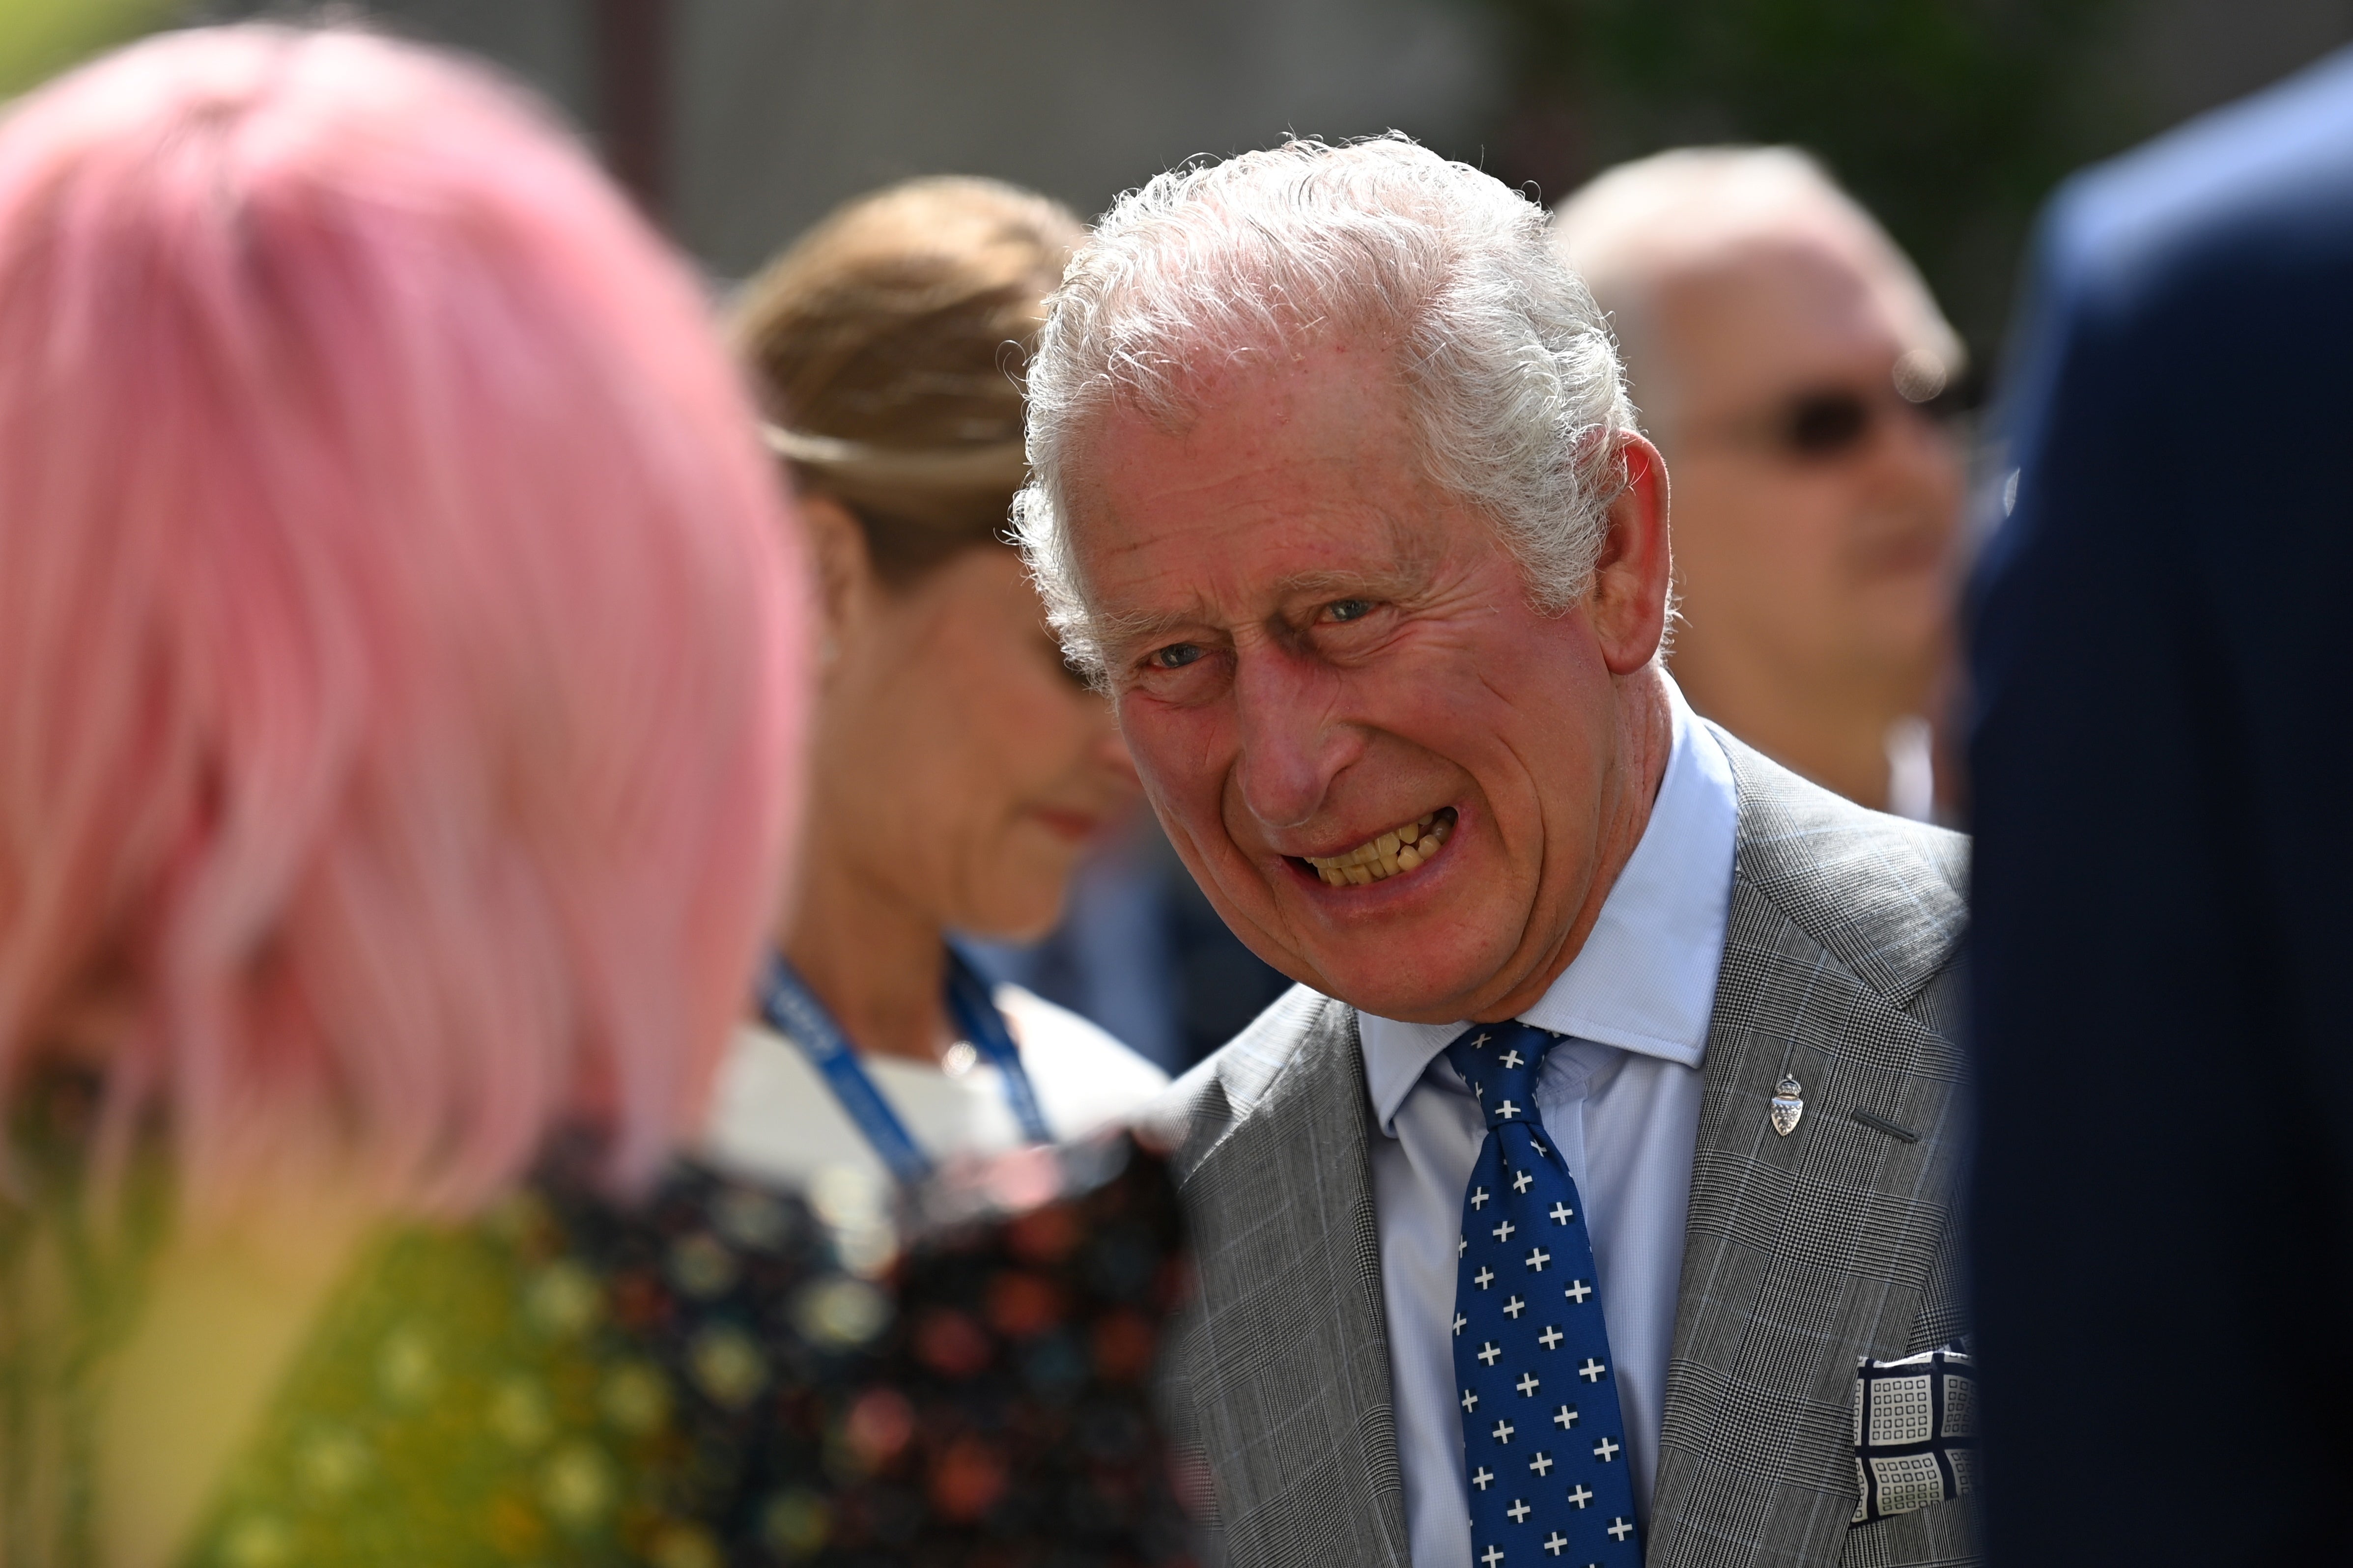 The Prince of Wales meeting members of staff at the Royal Bournemouth Hospital (Glyn Kirk/PA)